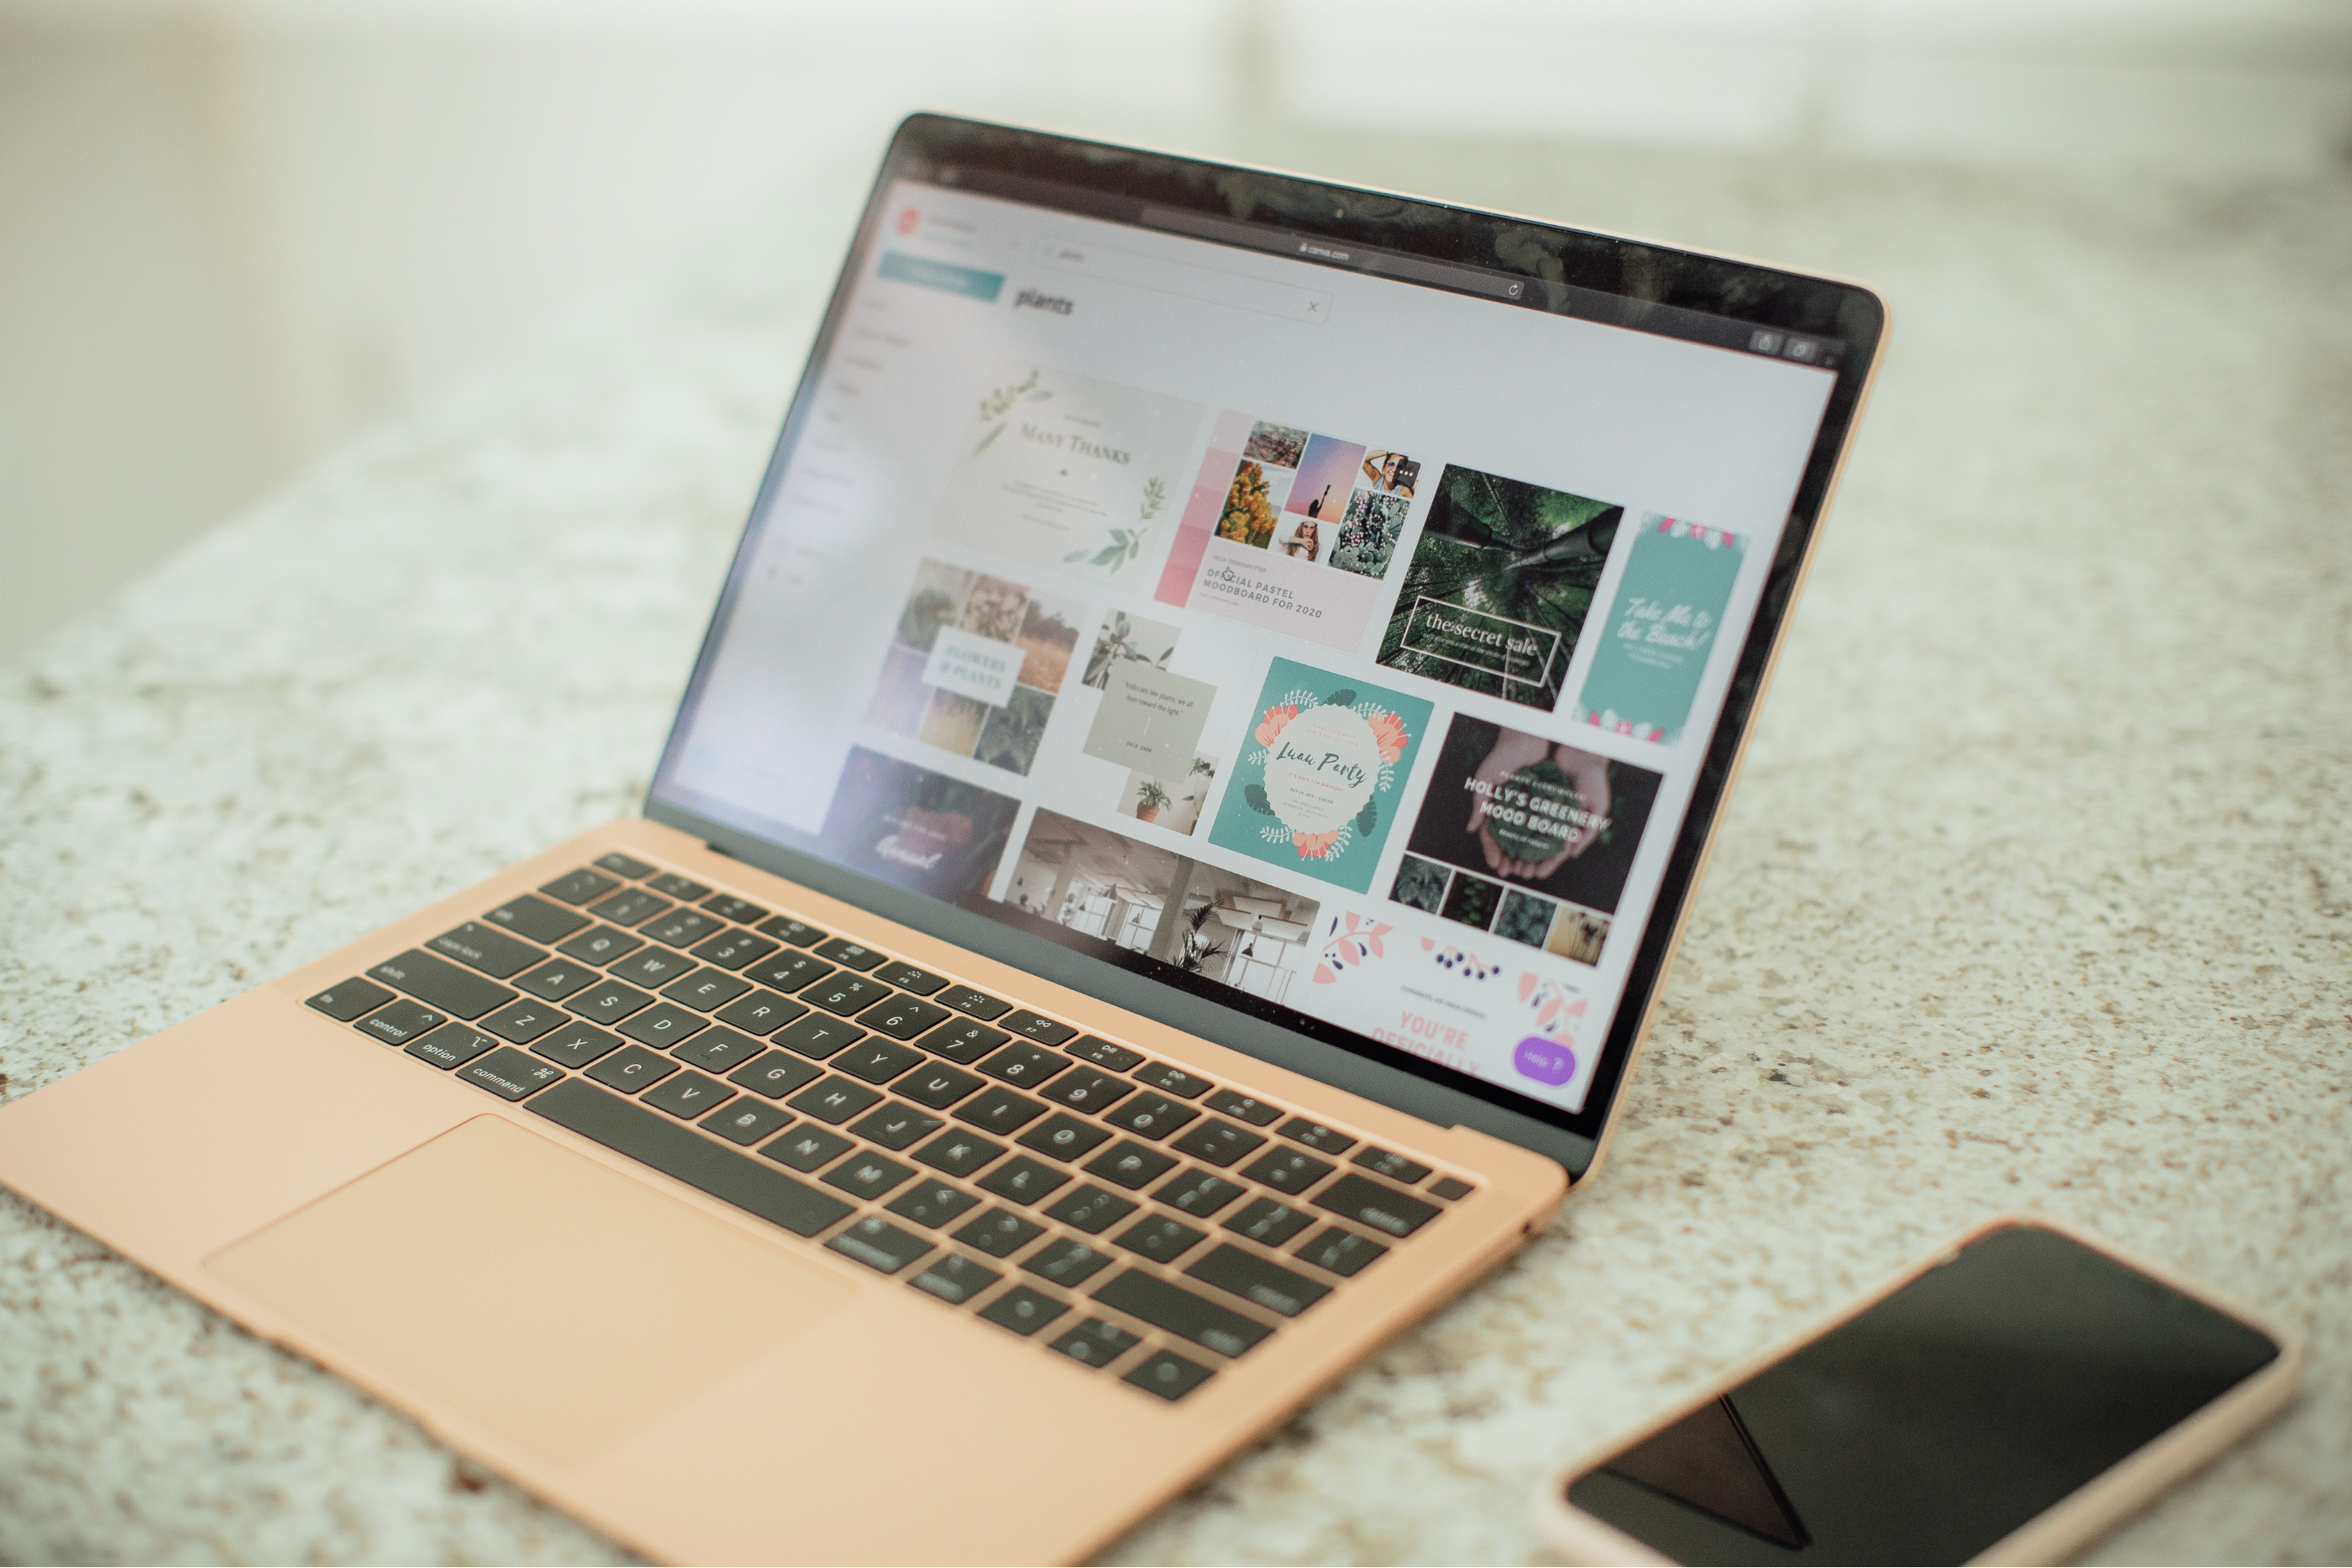 Canva site opened on laptop screen